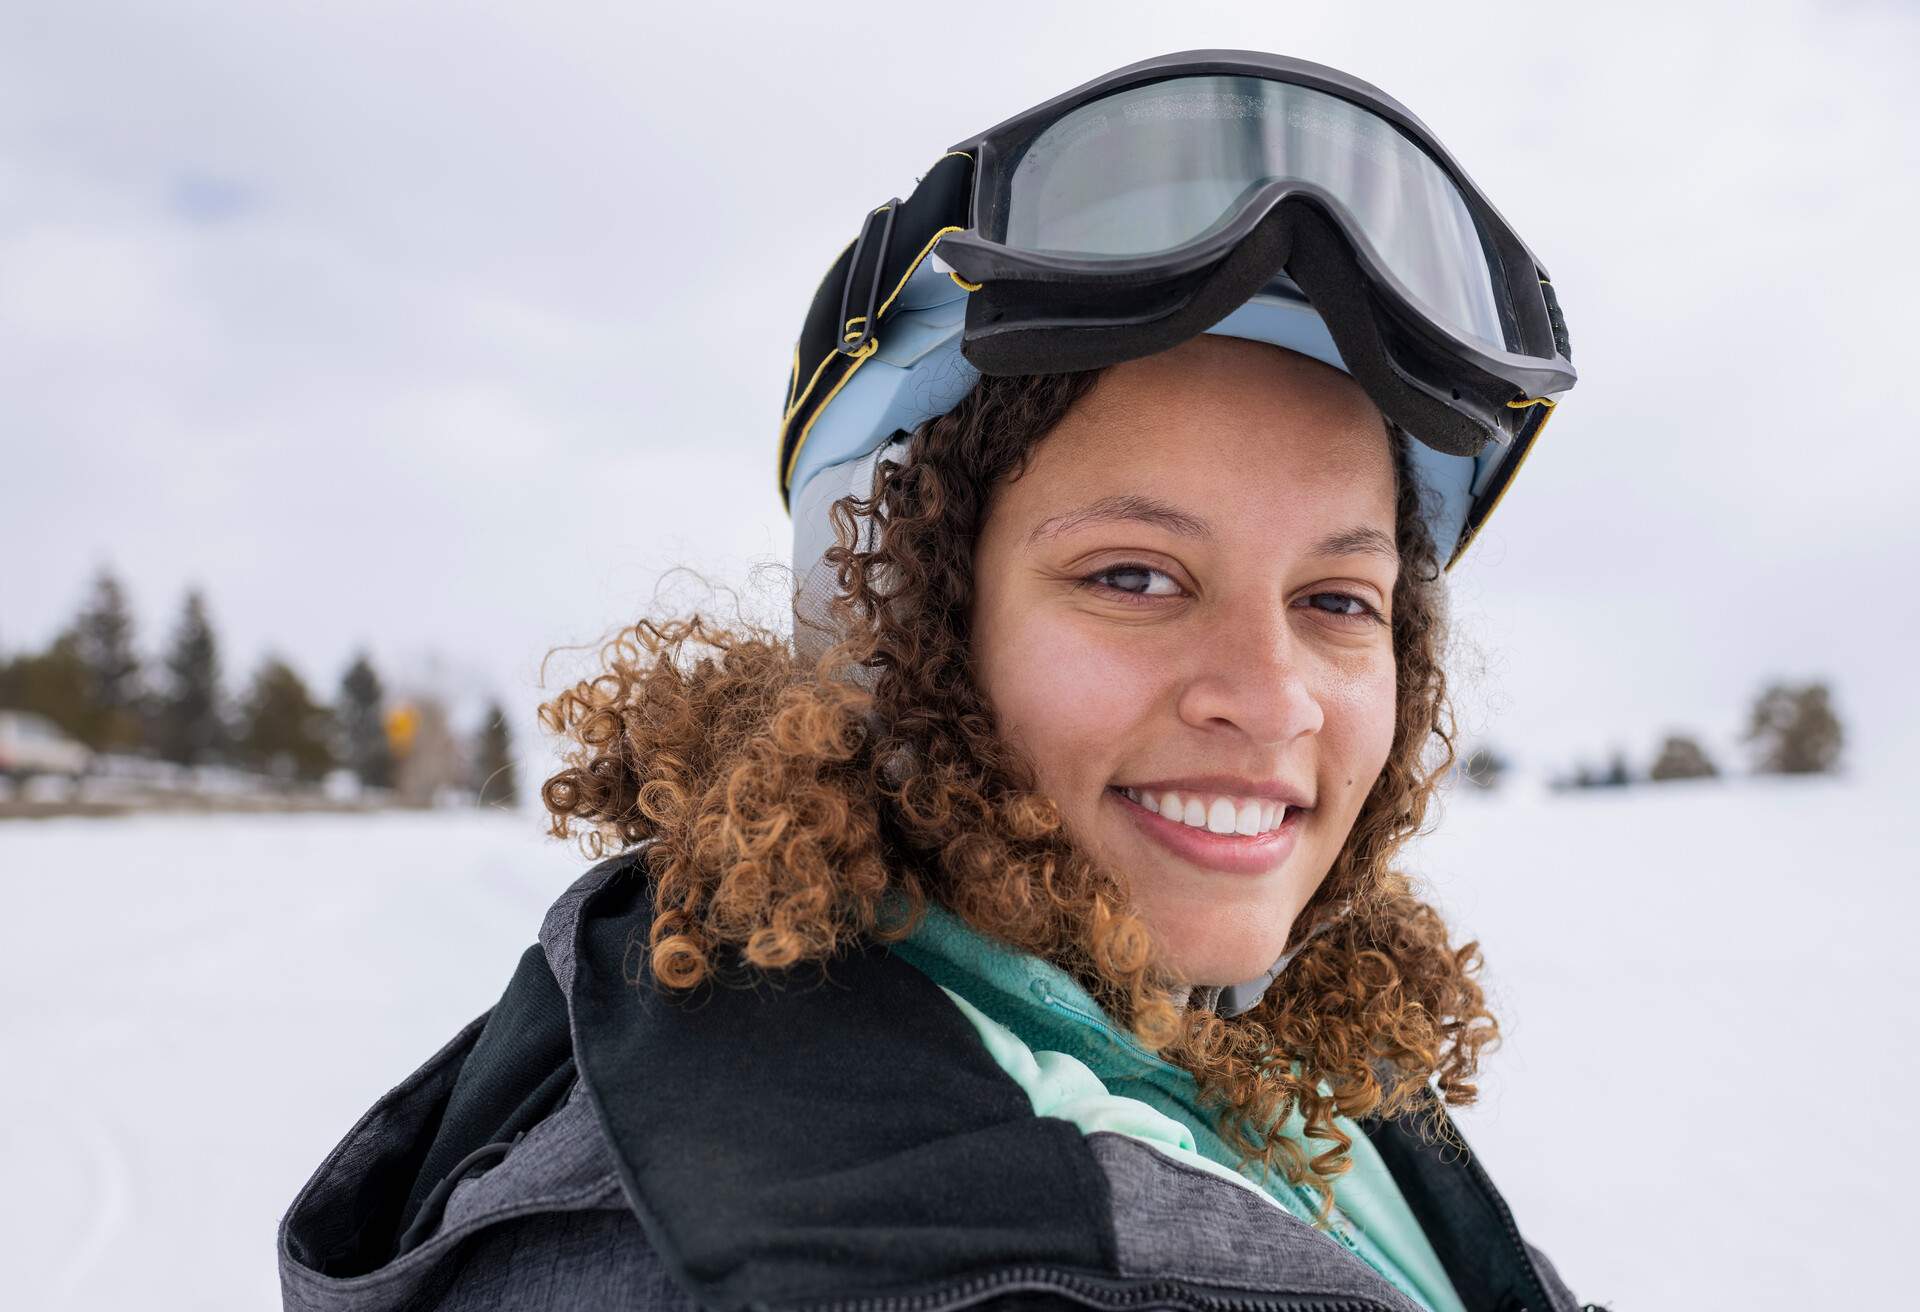 A curly-haired woman smiles while sporting ski goggles and winter clothing.